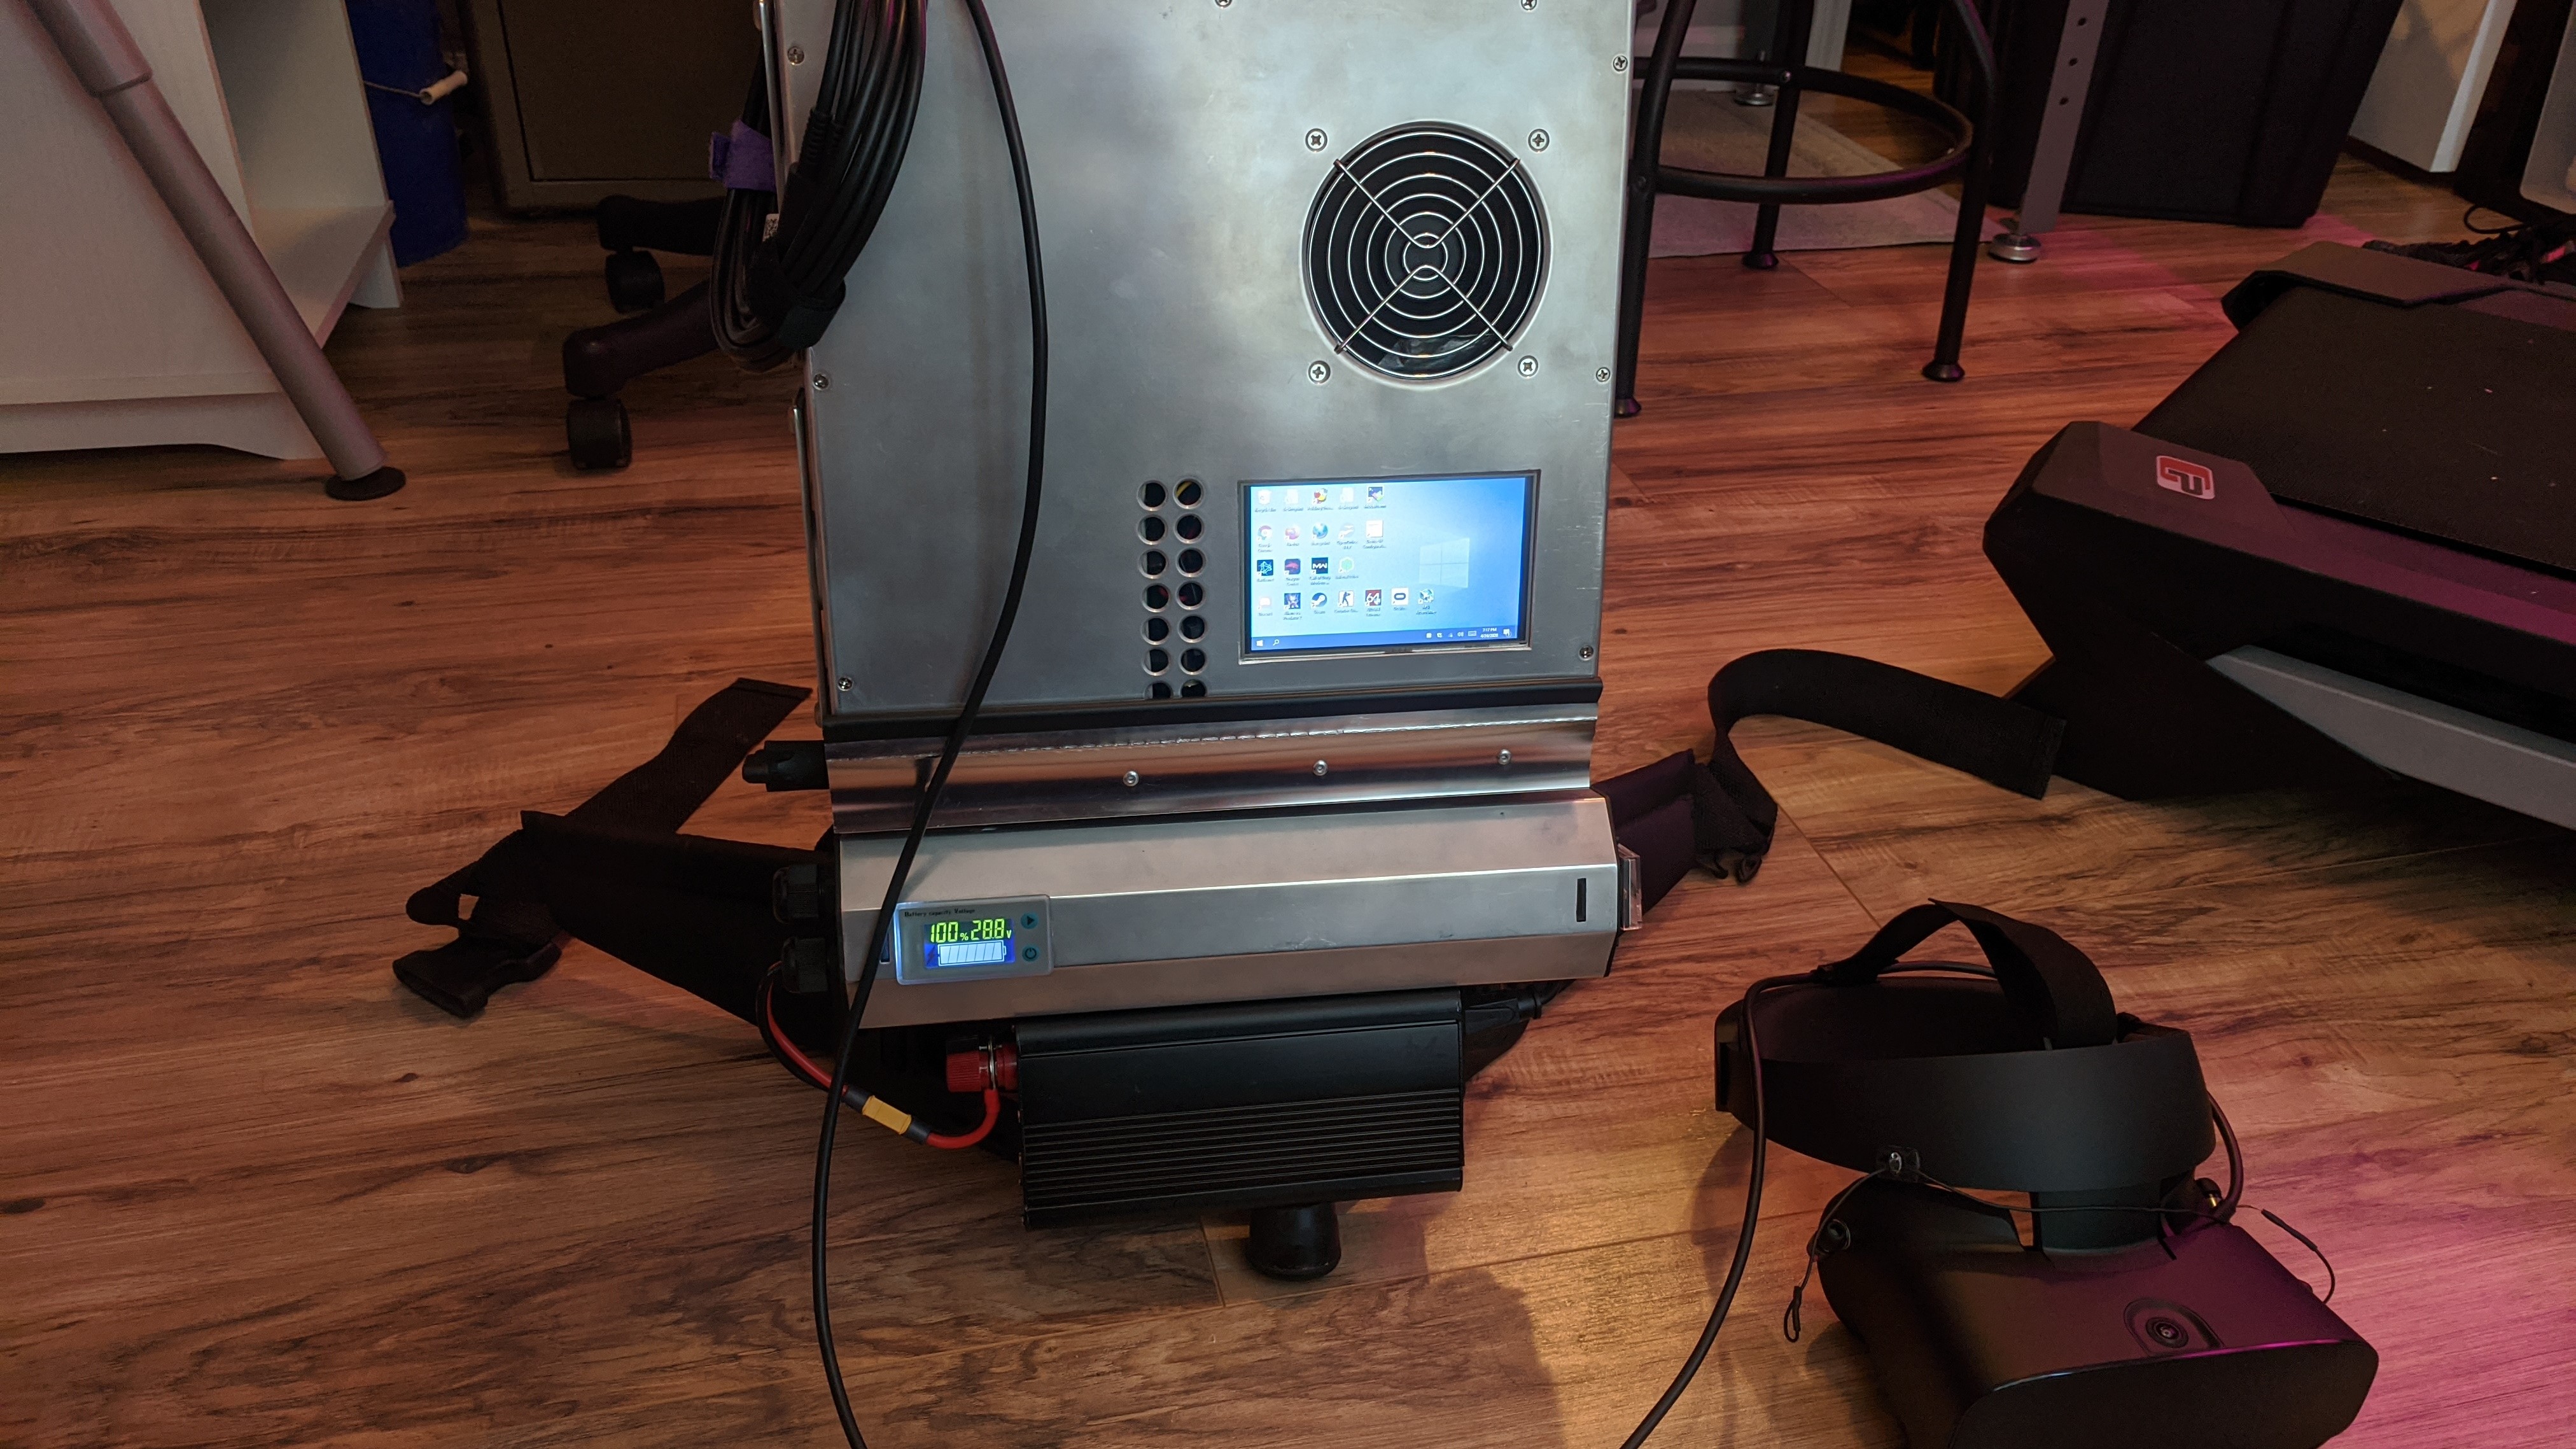 This DIY gaming PC case slots into a backpack and is VR ready